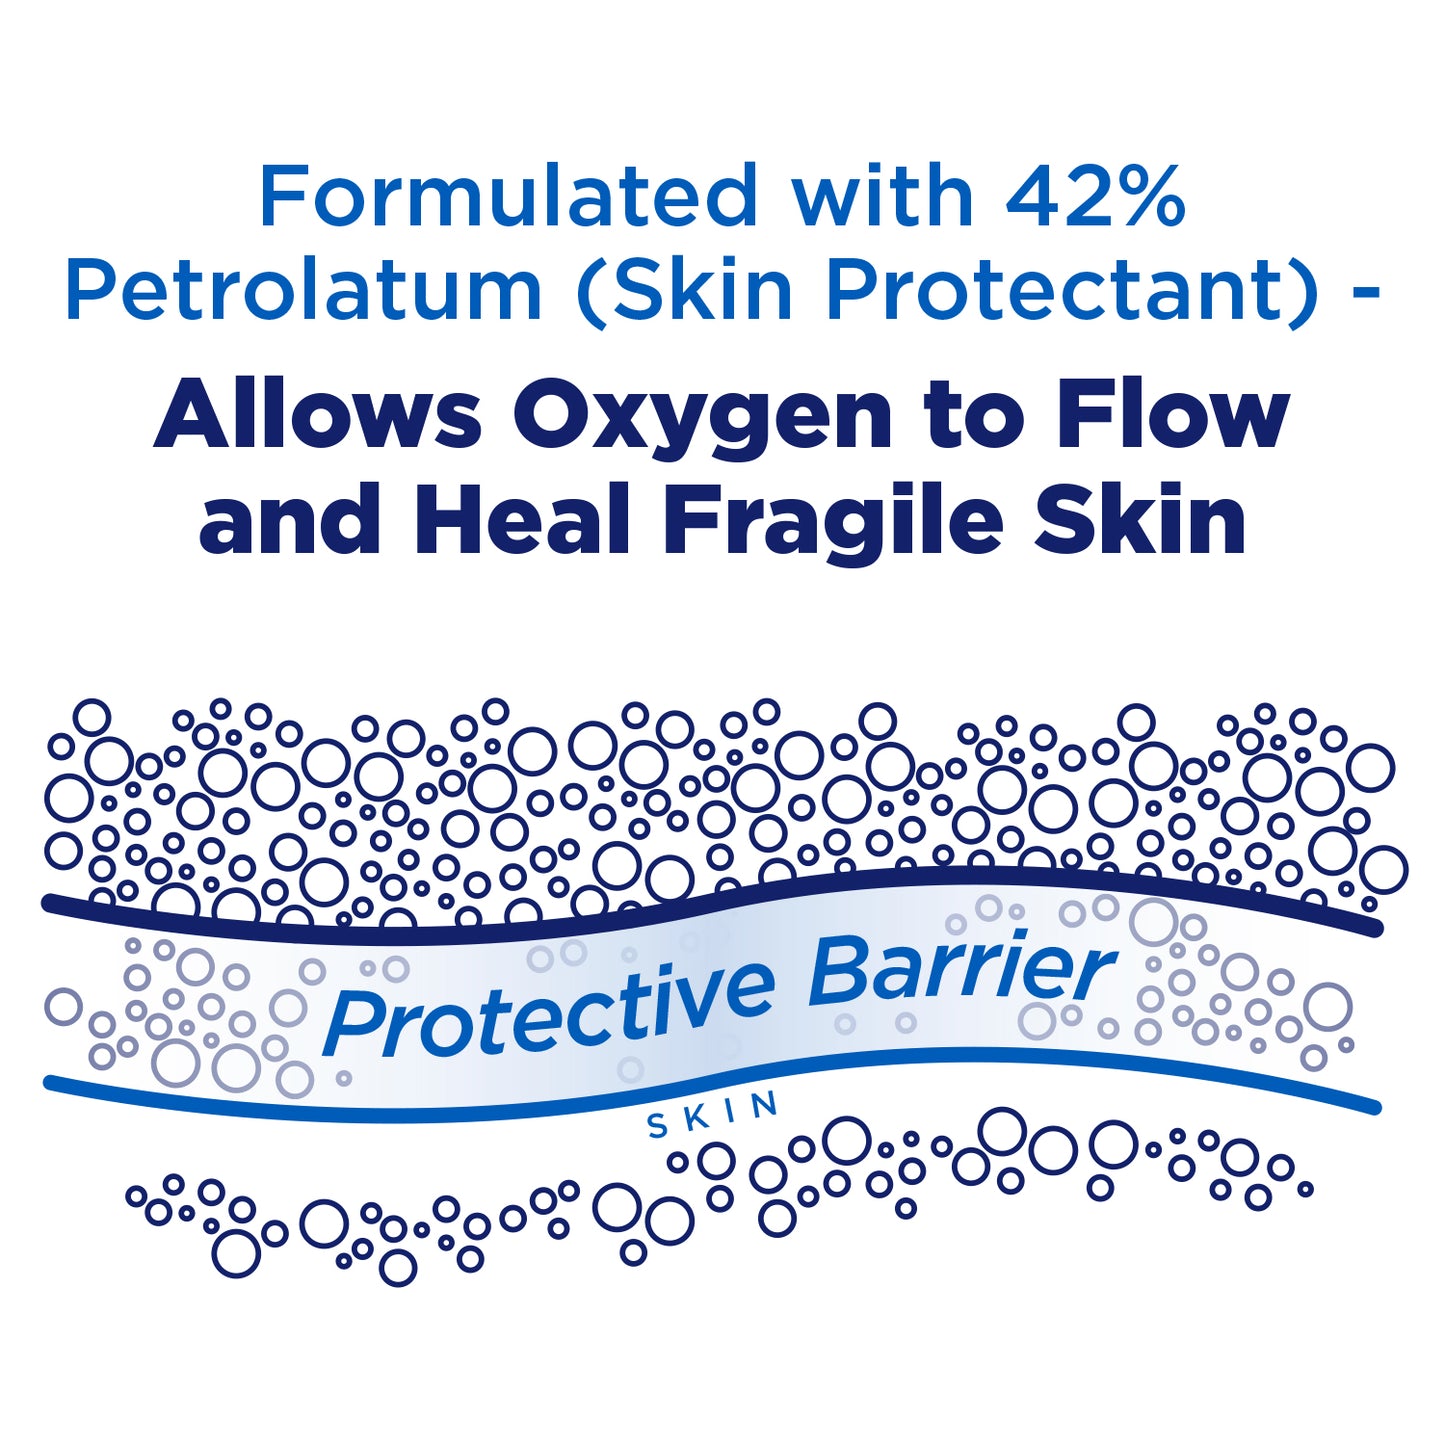 Fragile Skin Protective Ointment